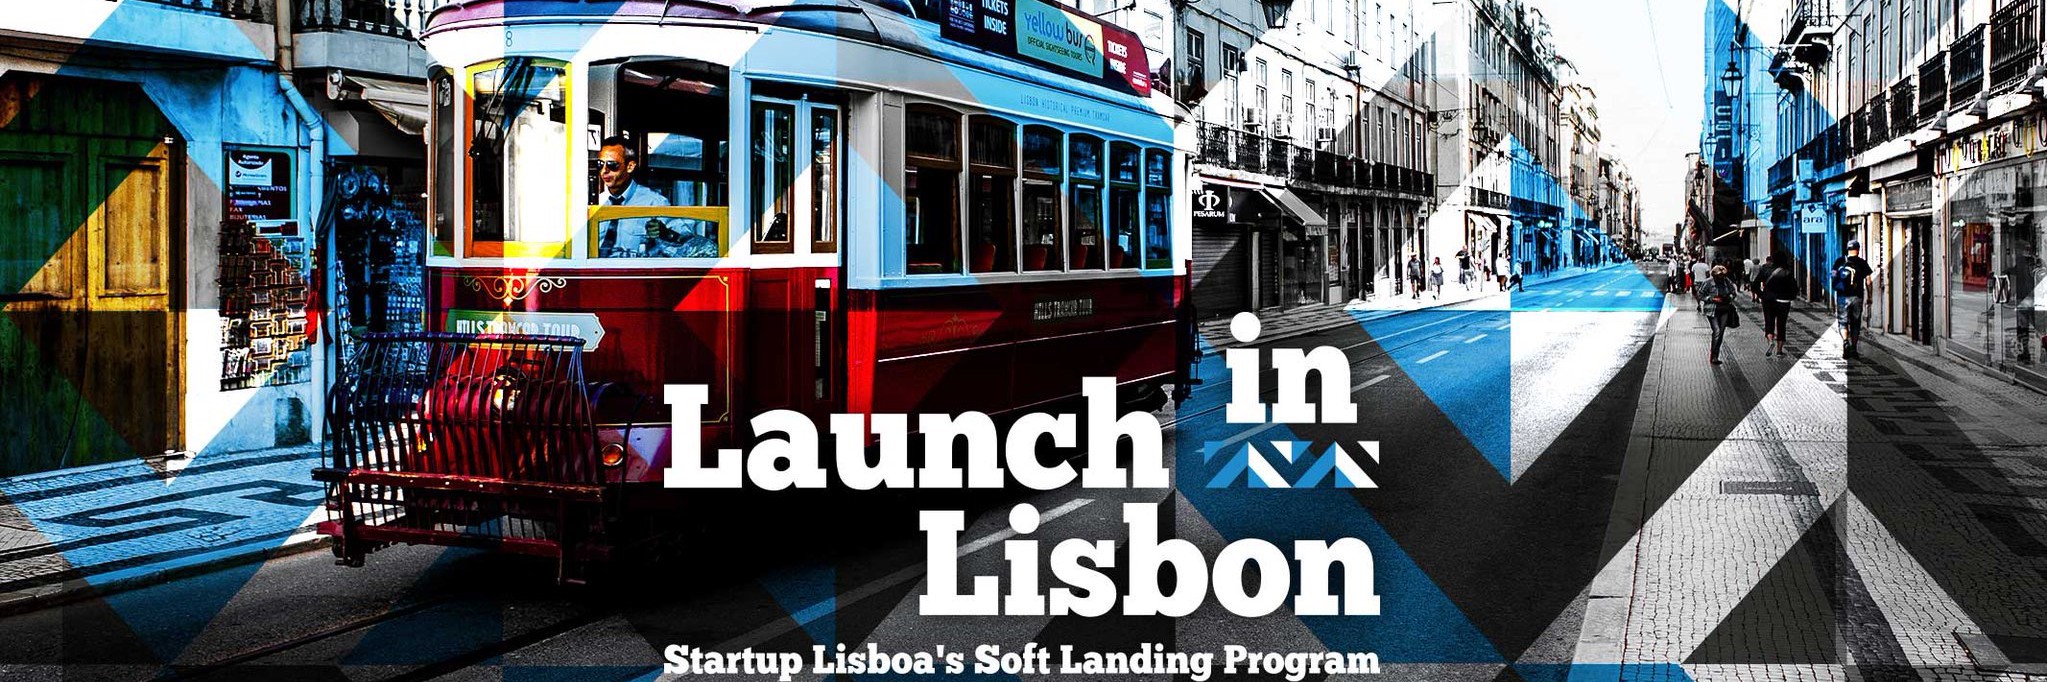 STARTUP LISBOA SUPPORTS ENTREPRENEURS WHO WANT TO SET UP BUSINESSES IN PORTUGAL